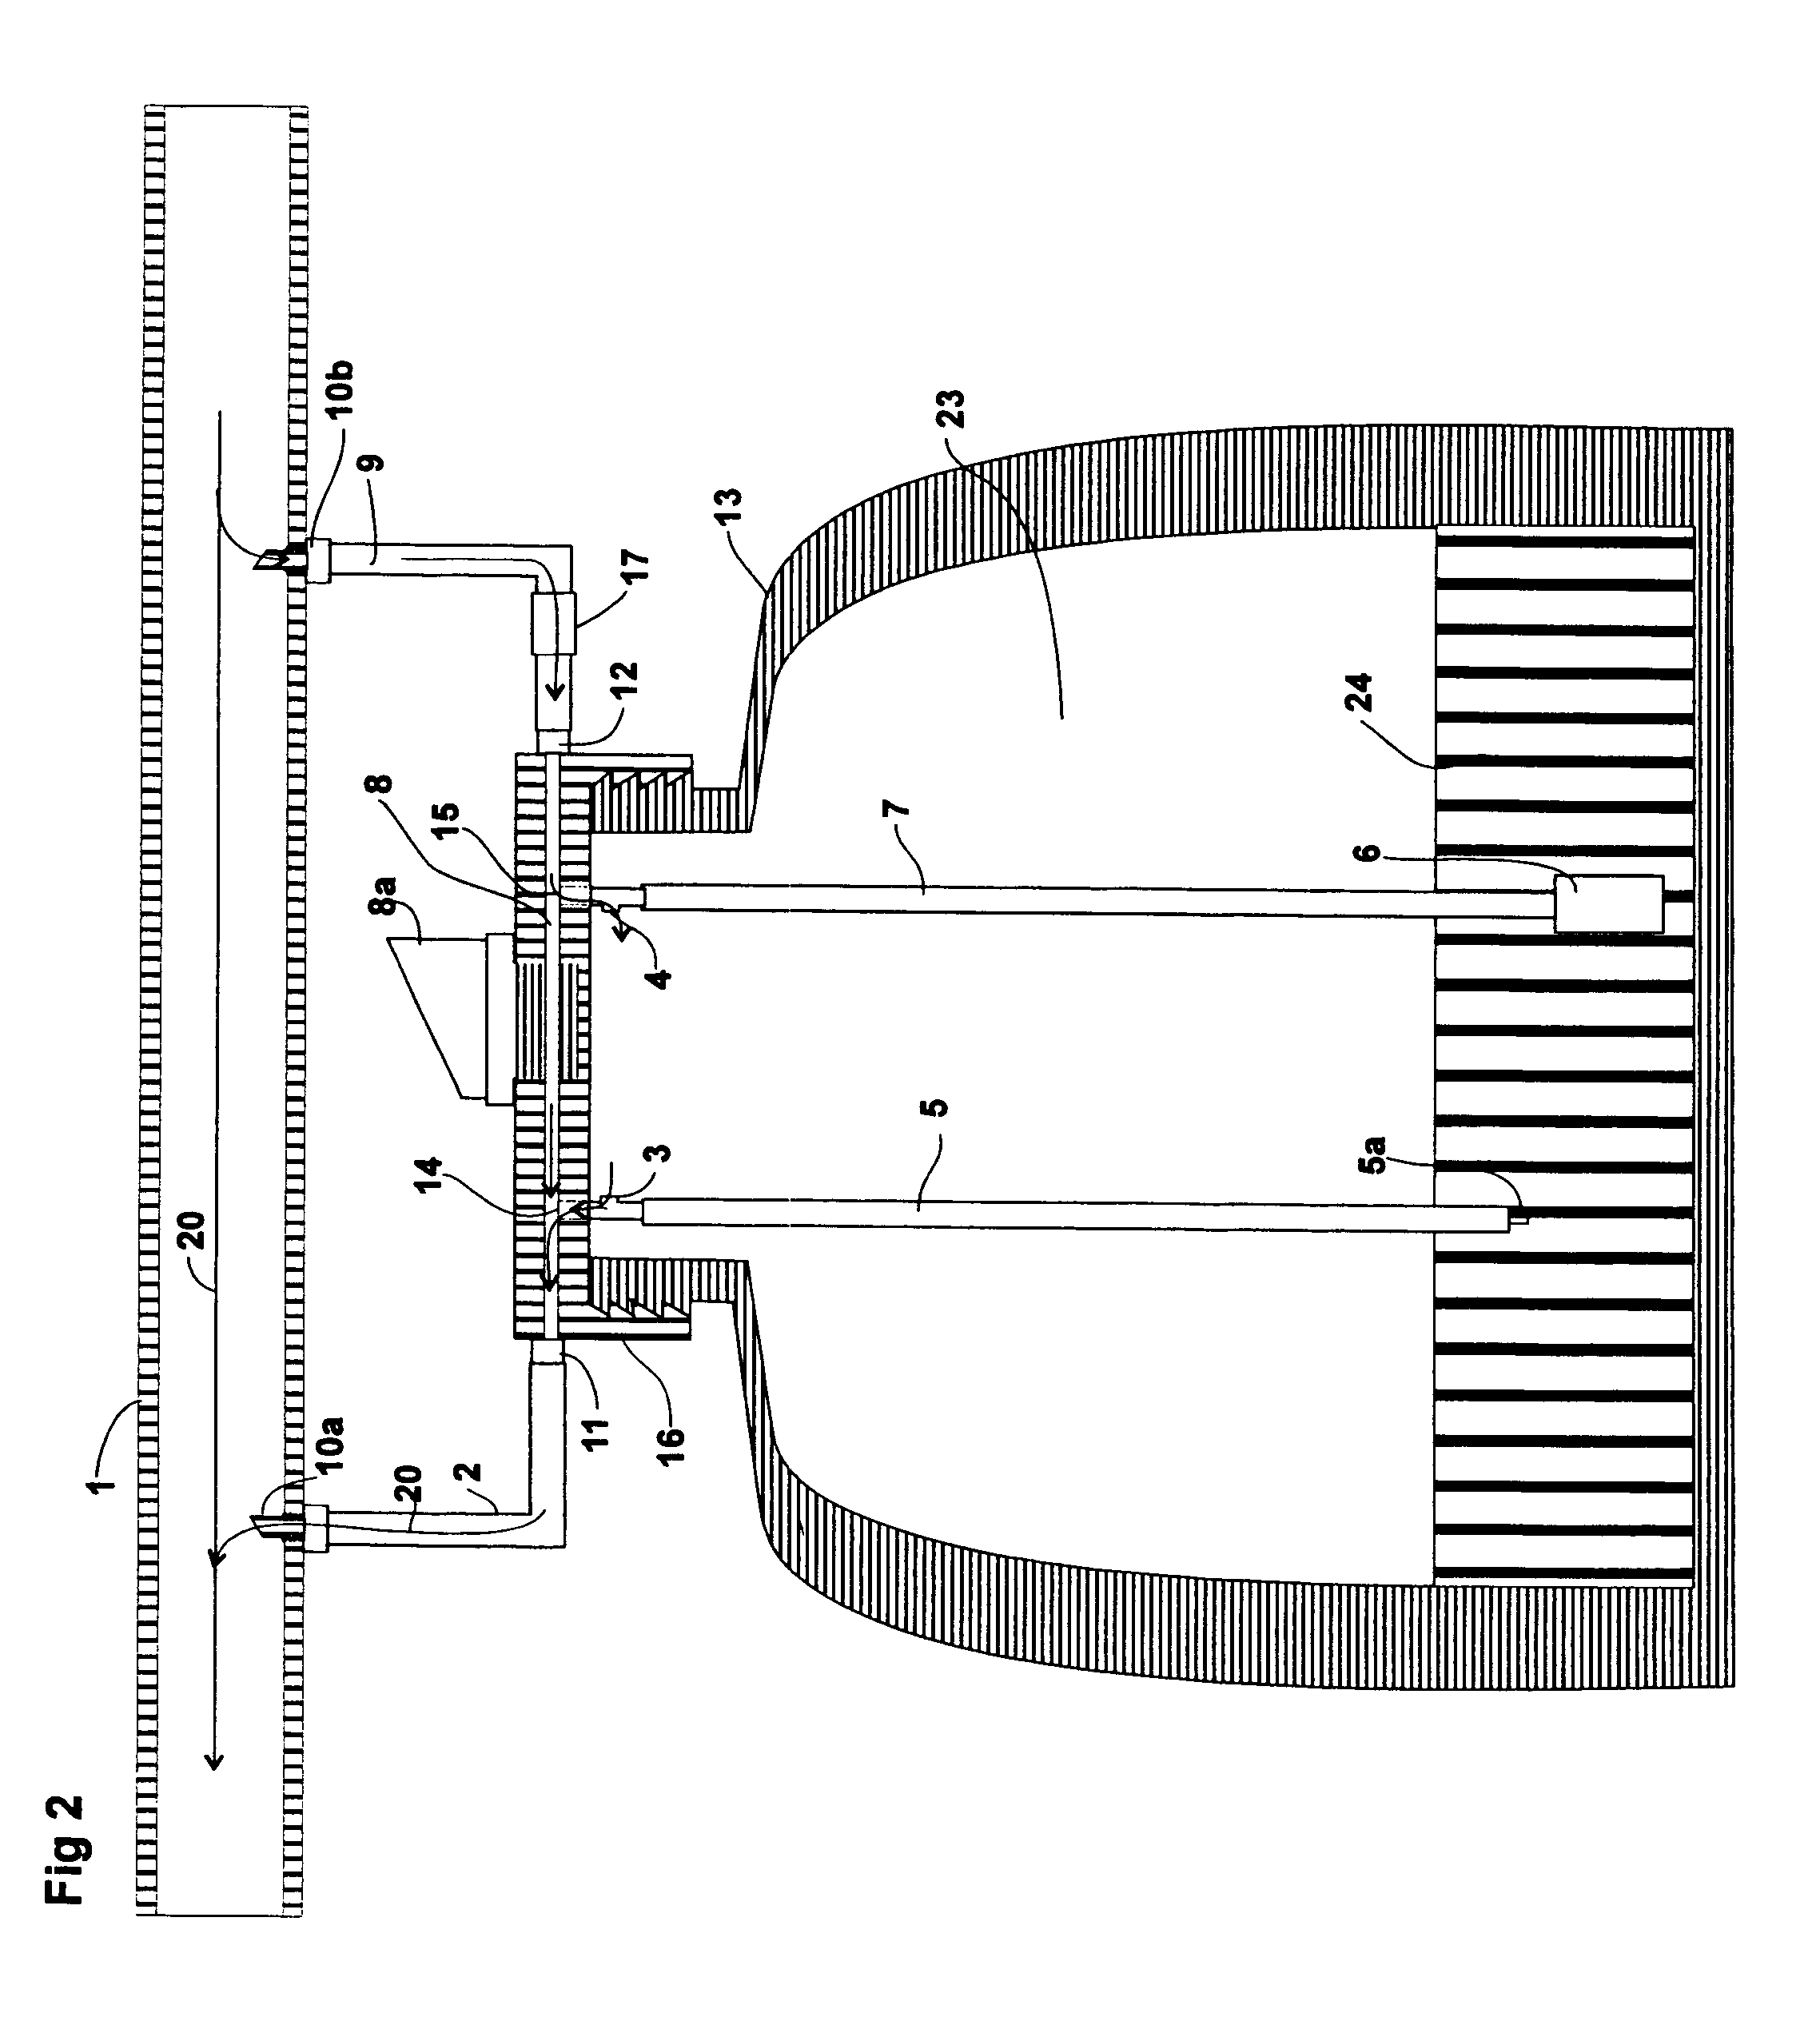 Fluid injector with vent/proportioner ports